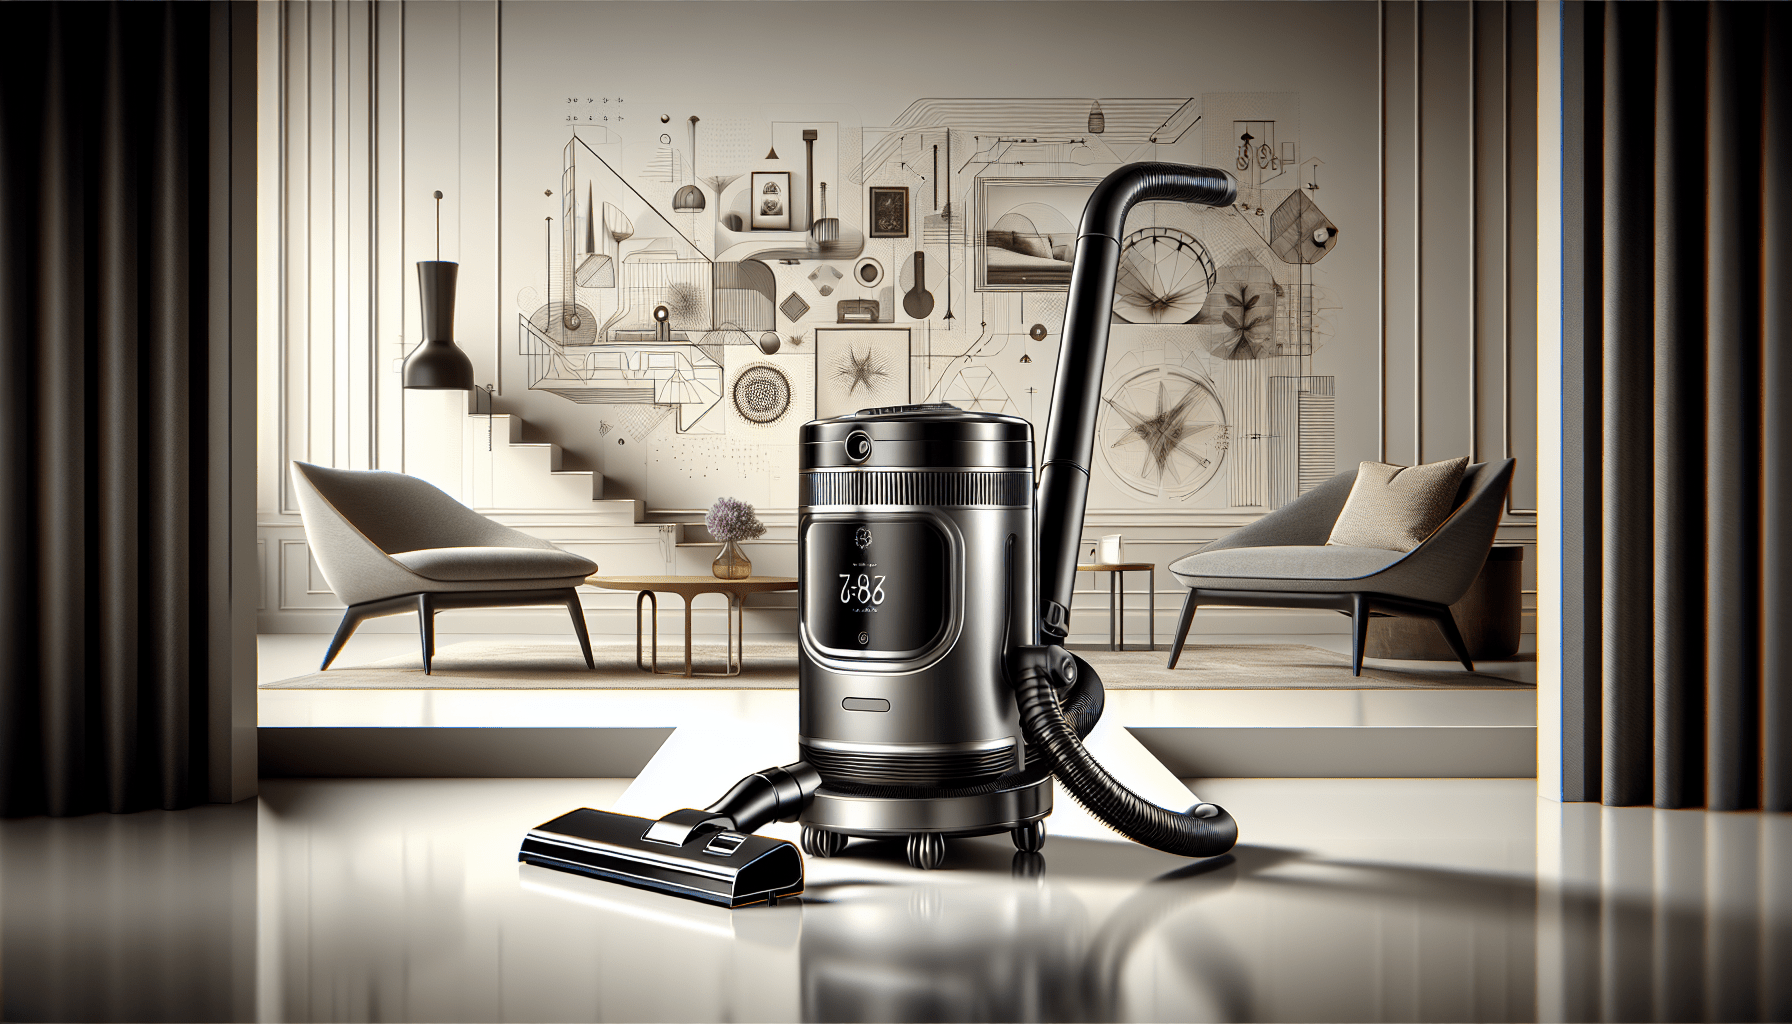 Why Has Dyson Been So Successful?